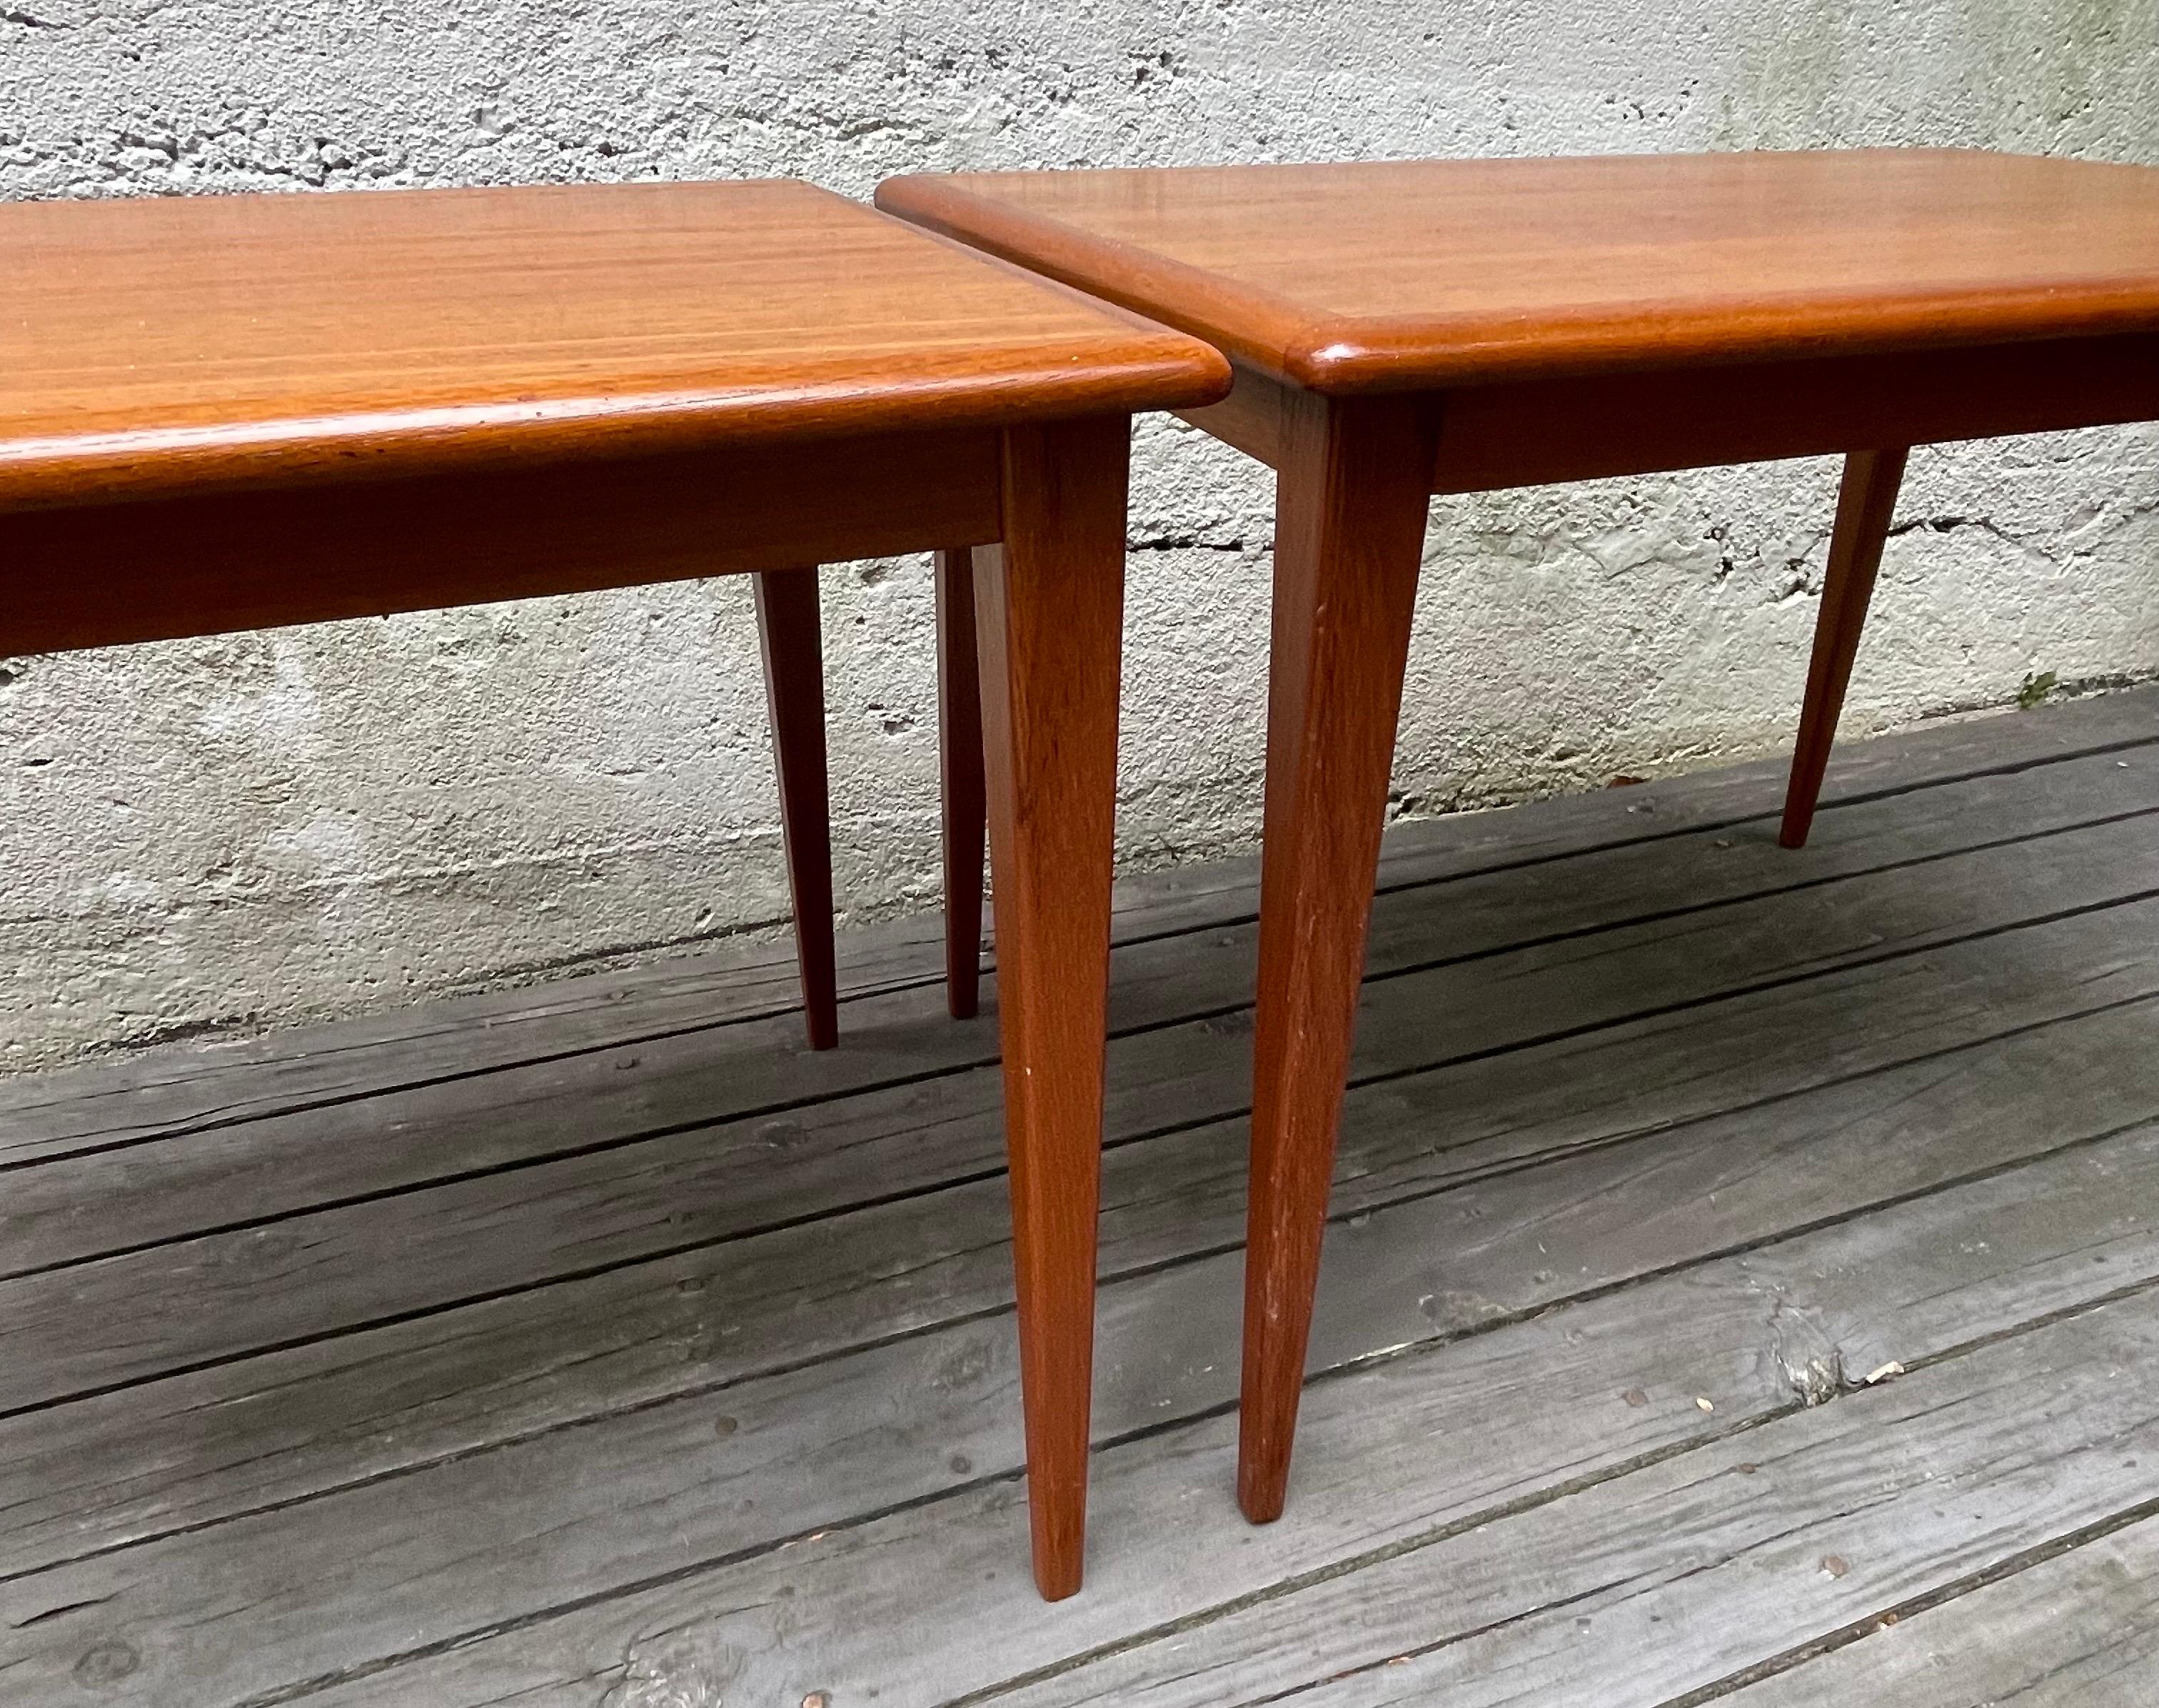 Pair of Mid-Century Modern Teak Side Tables or End Tables, Denmark, 1960's In Good Condition For Sale In Bedford Hills, NY